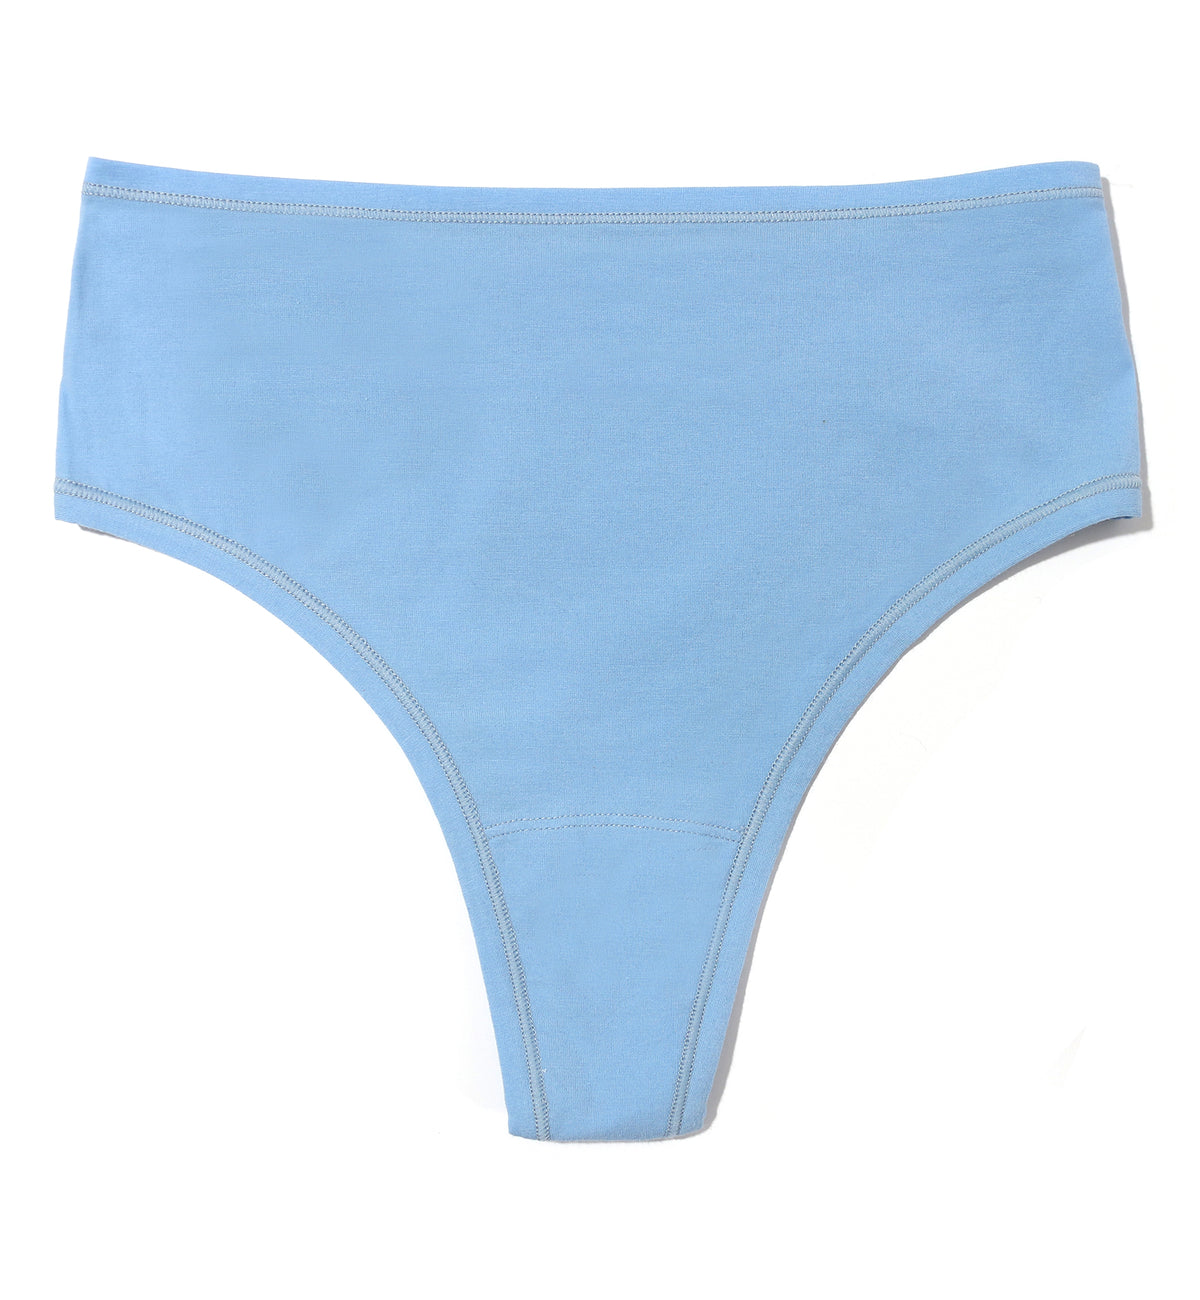 Hanky Panky Play Cotton Hi-Rise Thong (721924),XS/S,Partly Cloudy - Partly Cloudy,XS/S